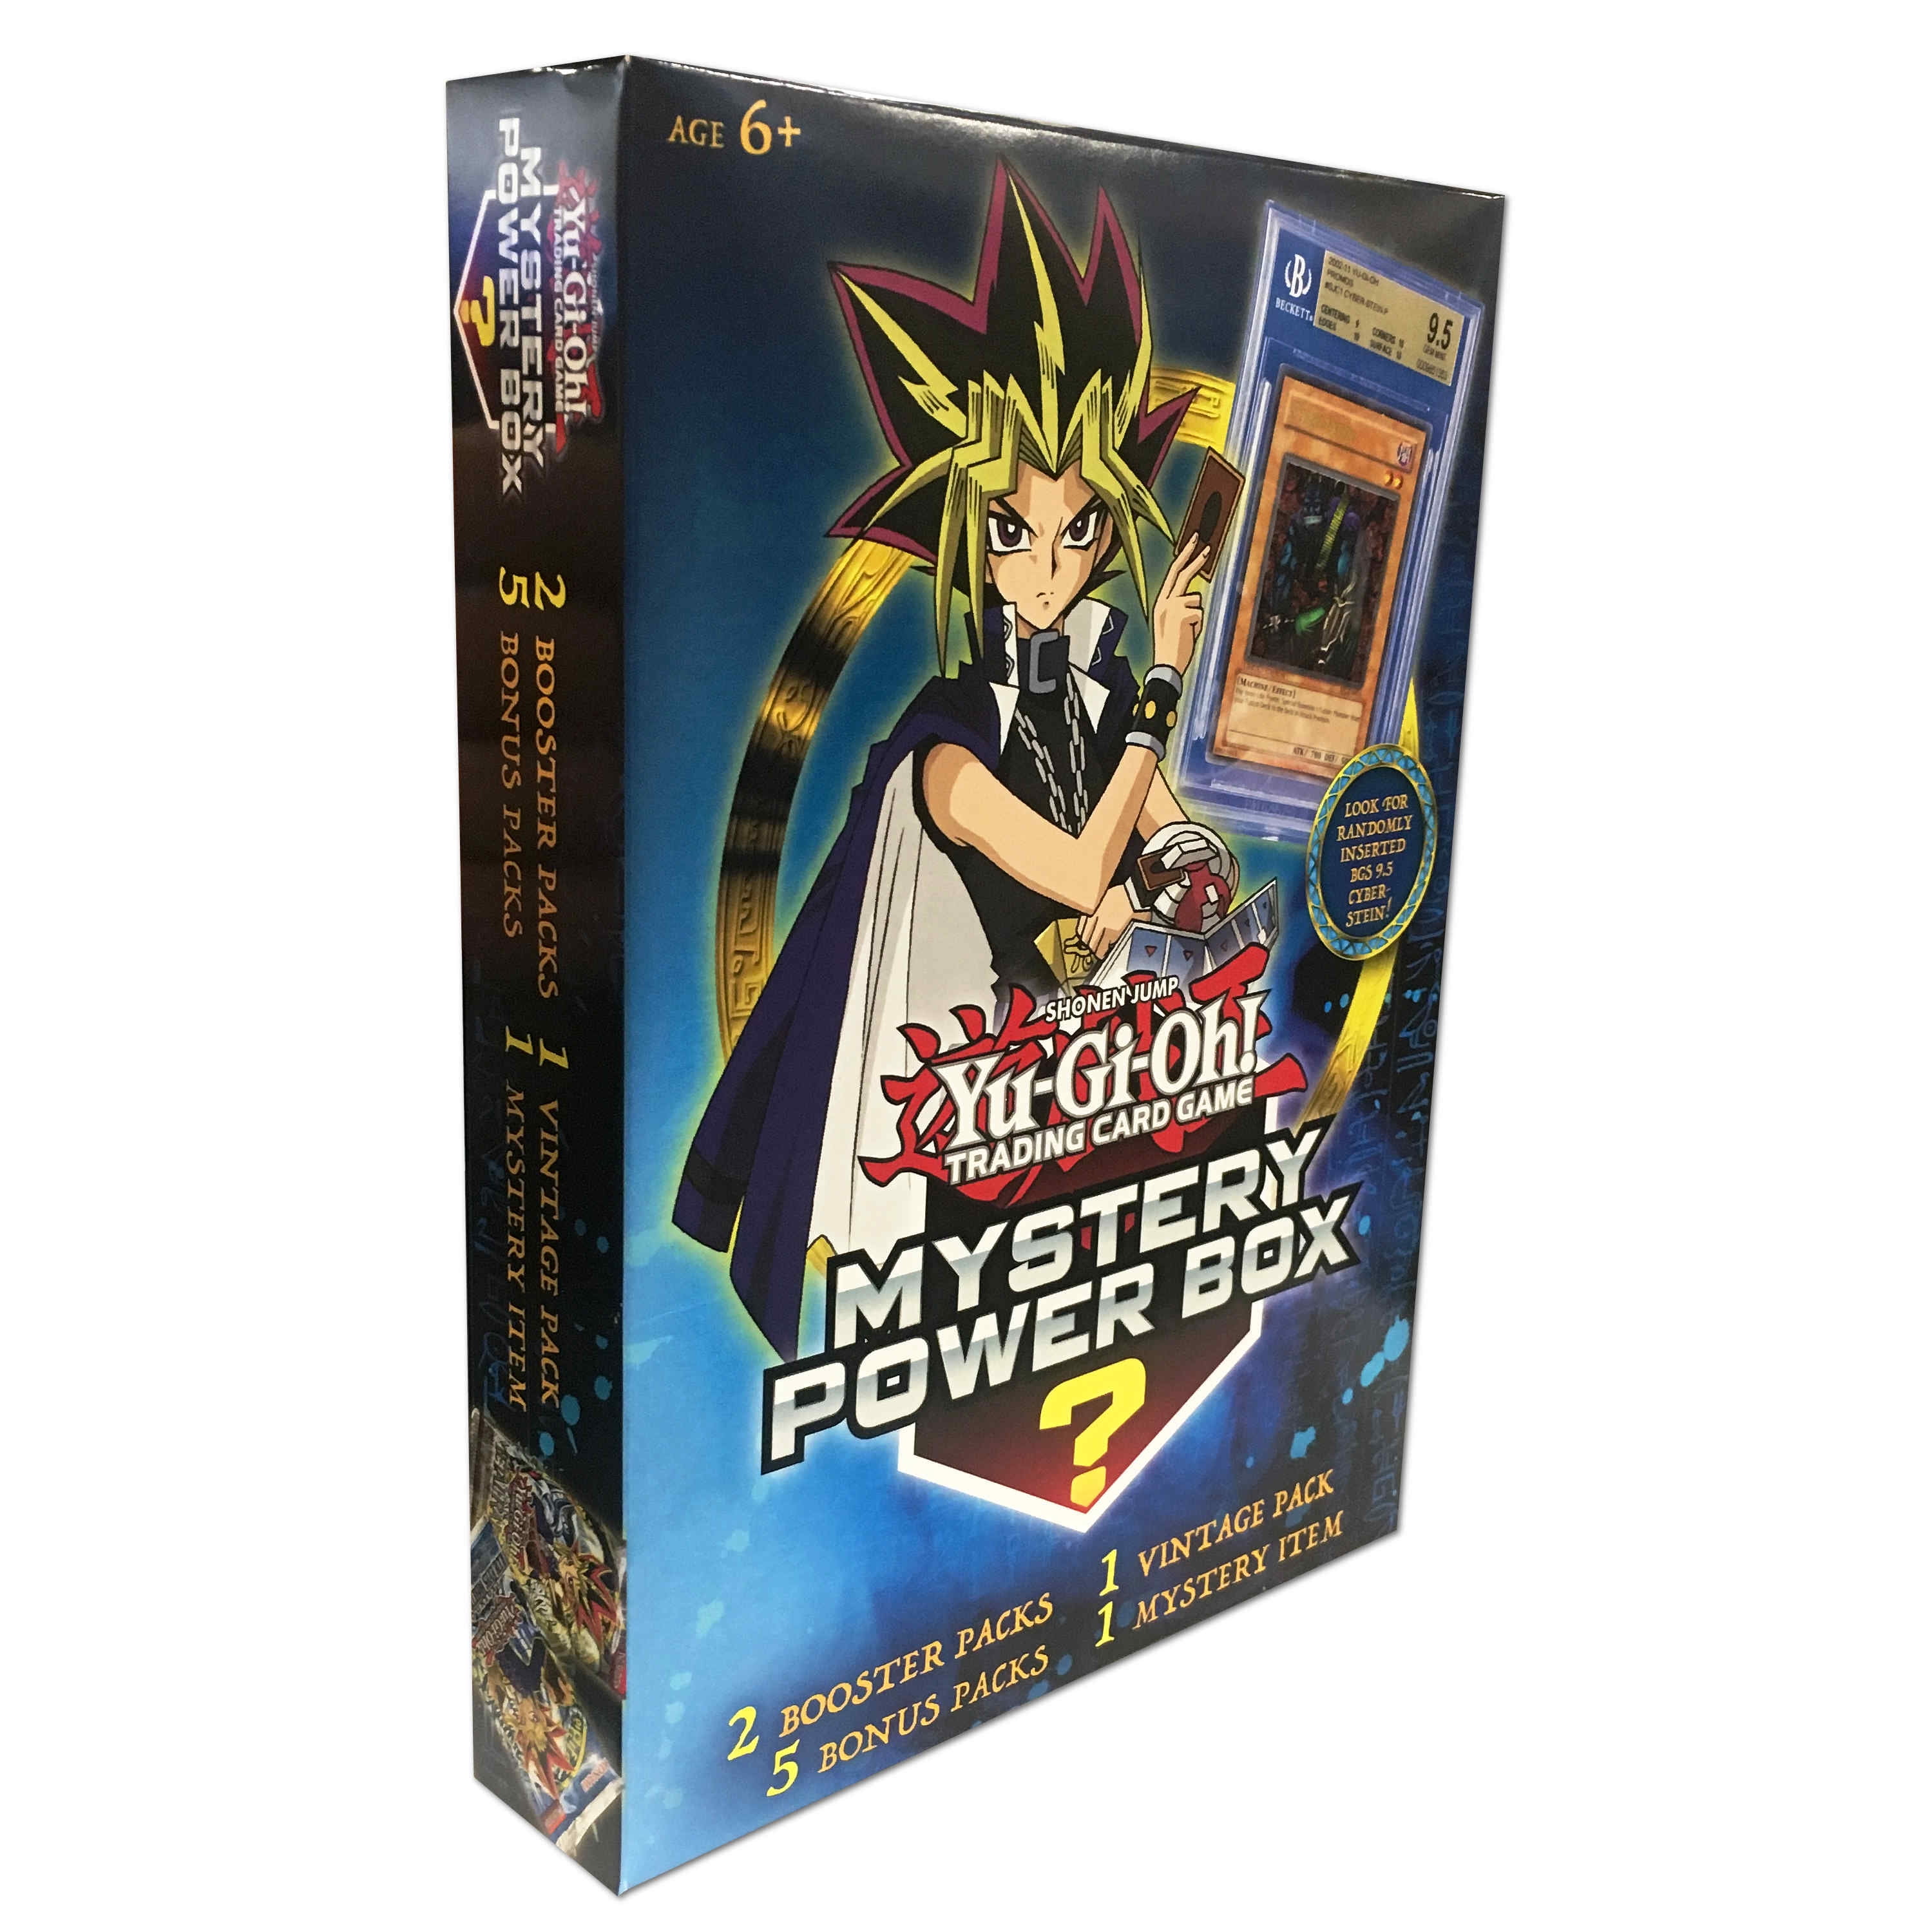 1x New Yugioh Walmart 2016 Mystery Cube 6 Booster Packs 3 Foil Cards Vintage Htf 